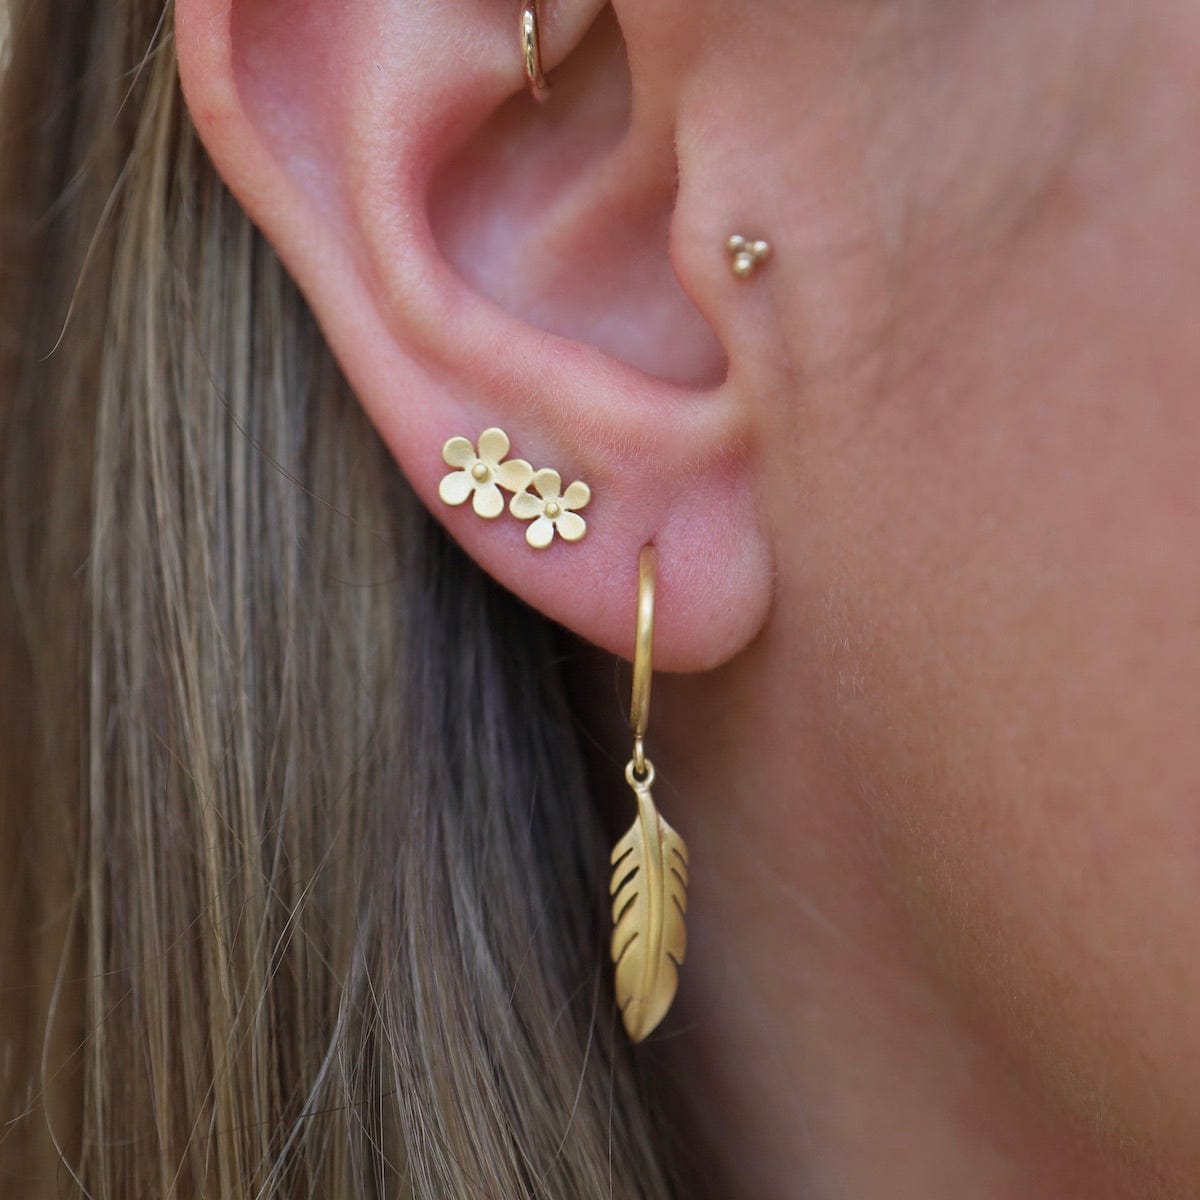 EAR-VRM Brushed Gold Vermeil Hoops With Feathers